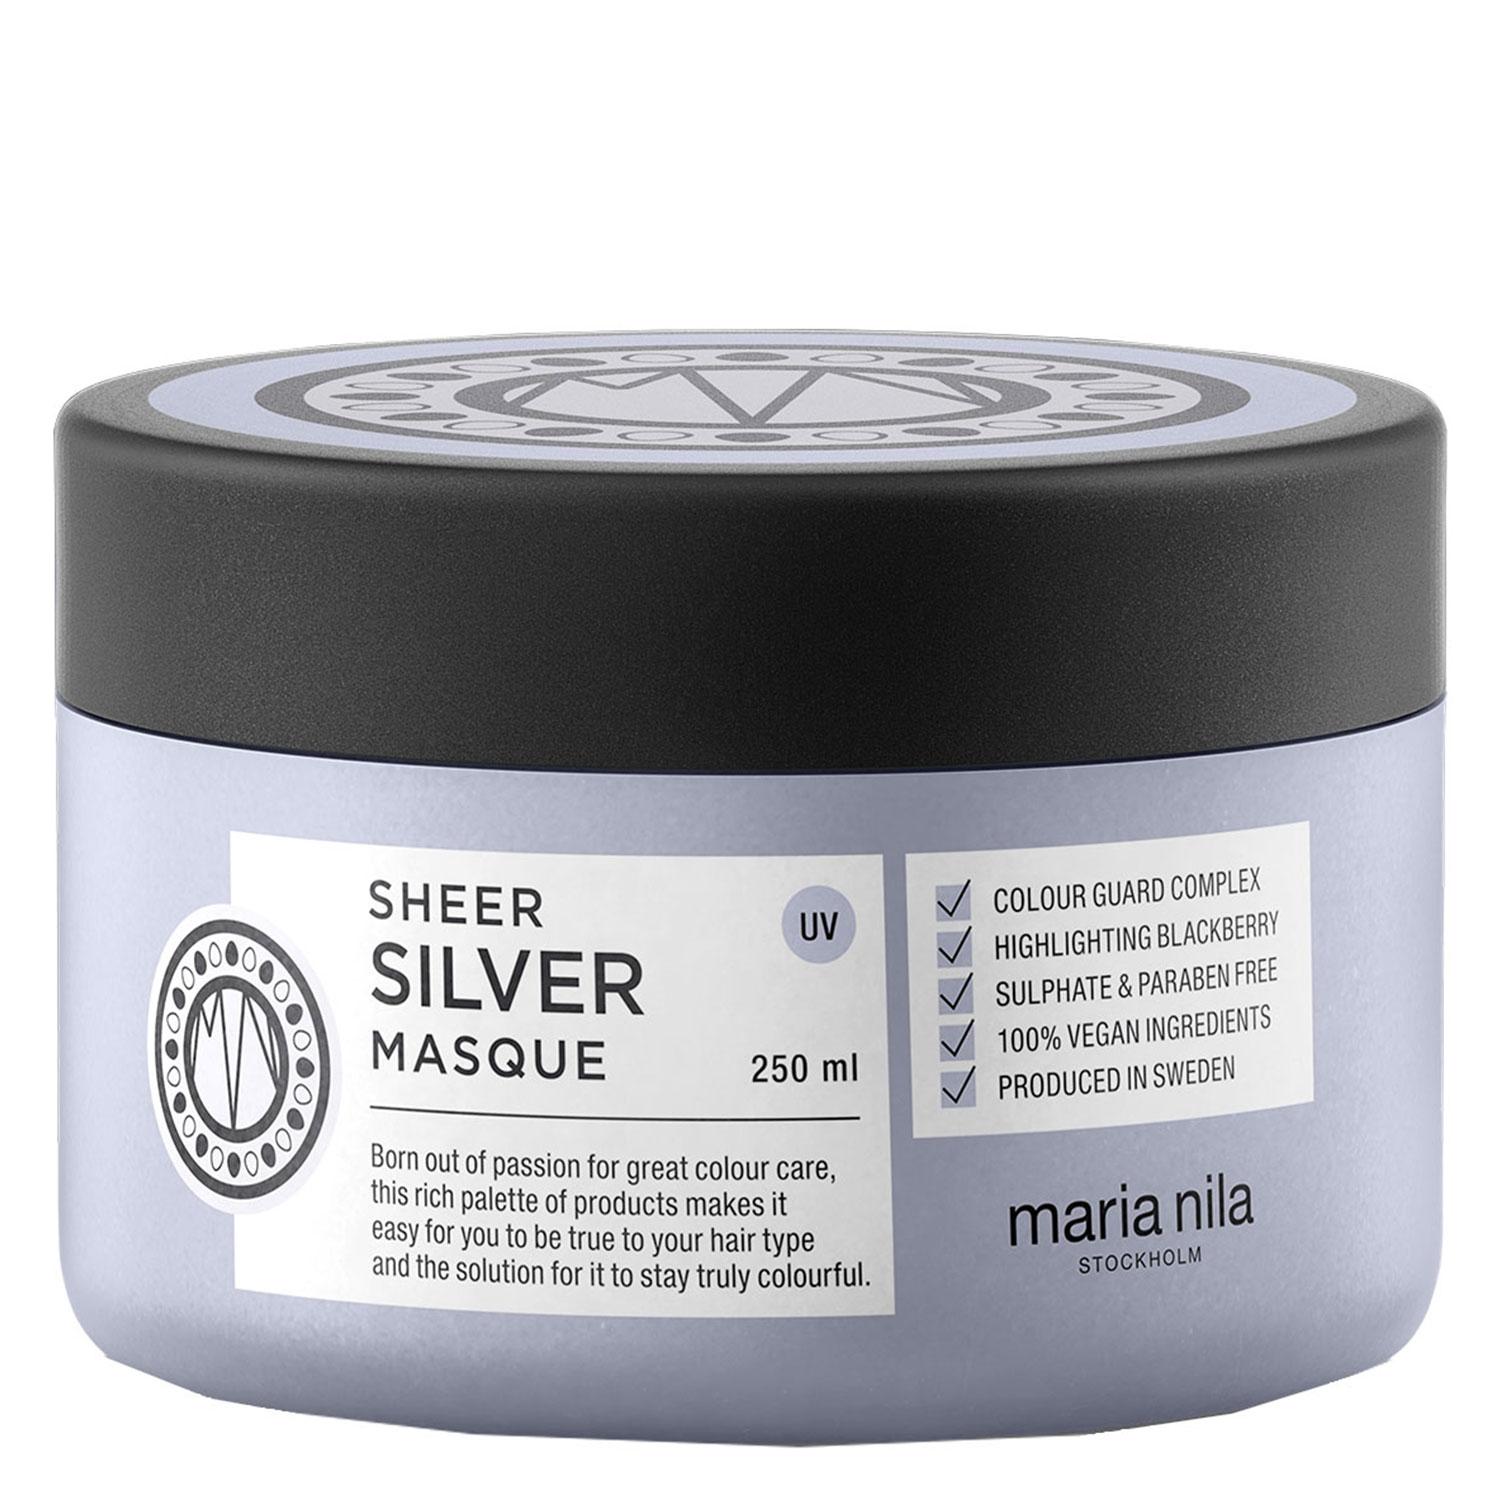 Care & Style - Sheer Silver Masque